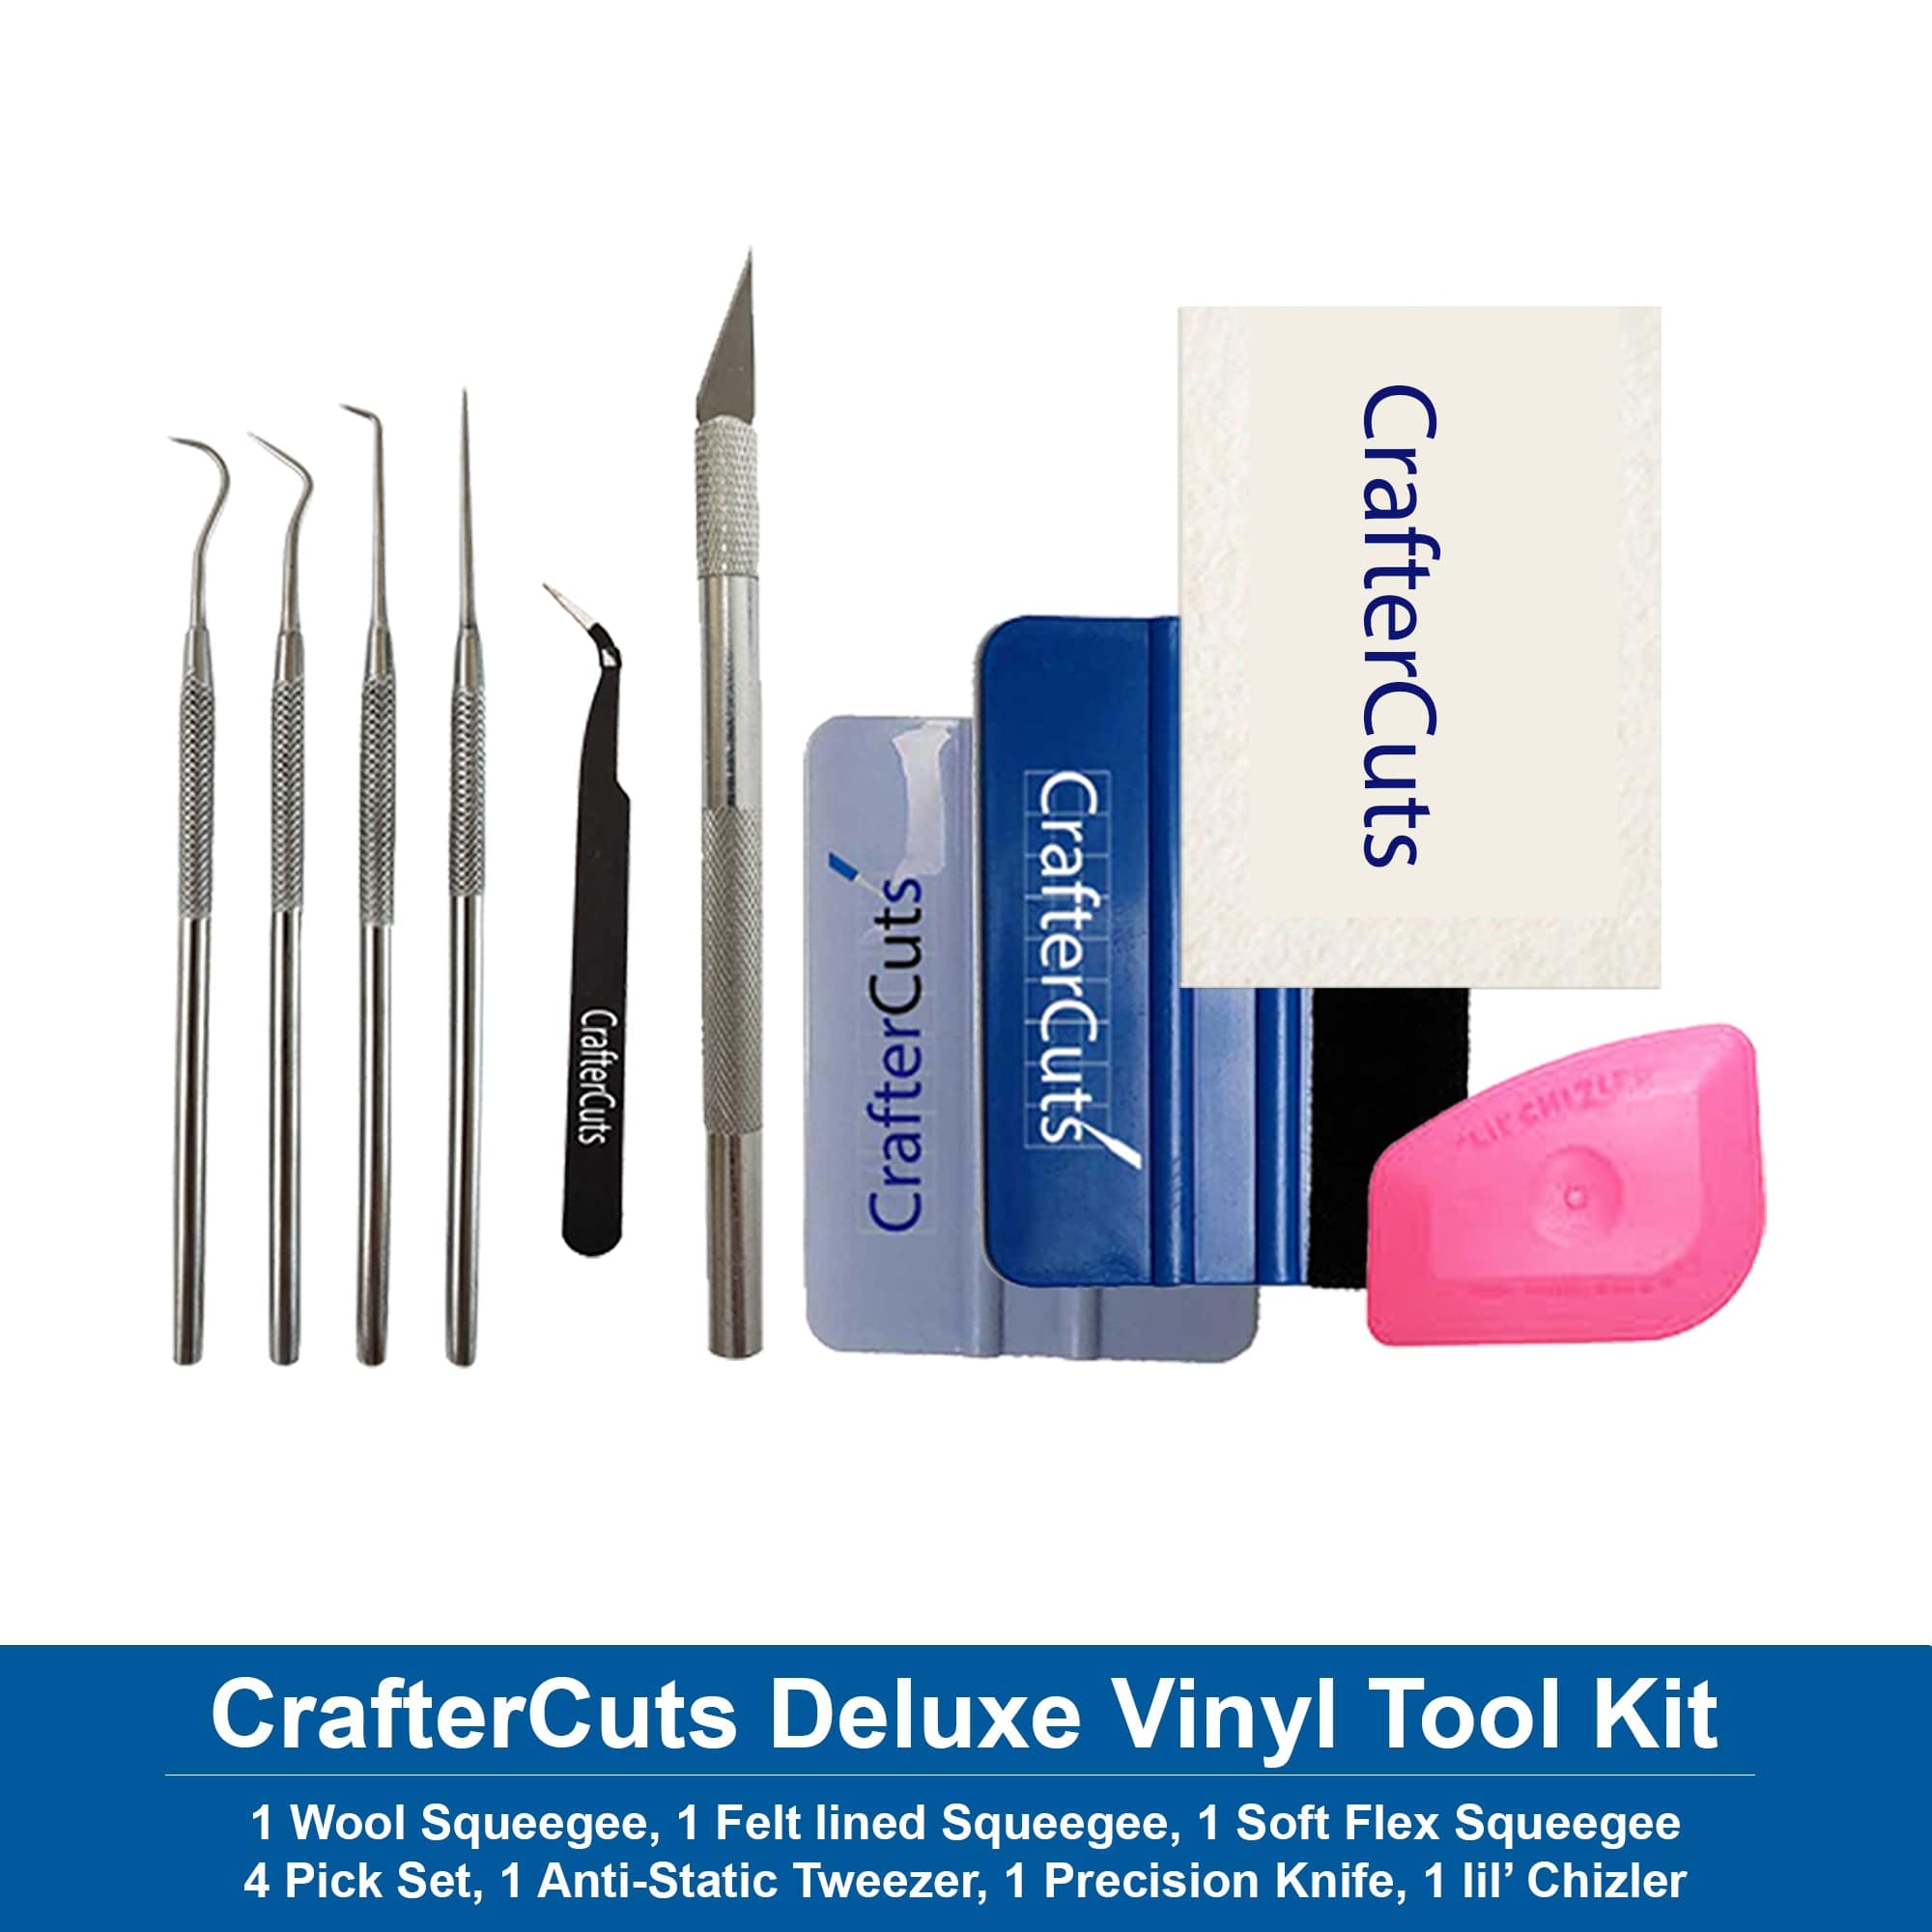  Silhouette Cameo 4 Plus Bundle with 2 Autoblades, 3 different  Cutting mats, CC Vinyl Tool Kit, 100 Designs, and Access to Ebooks, Classes  and more